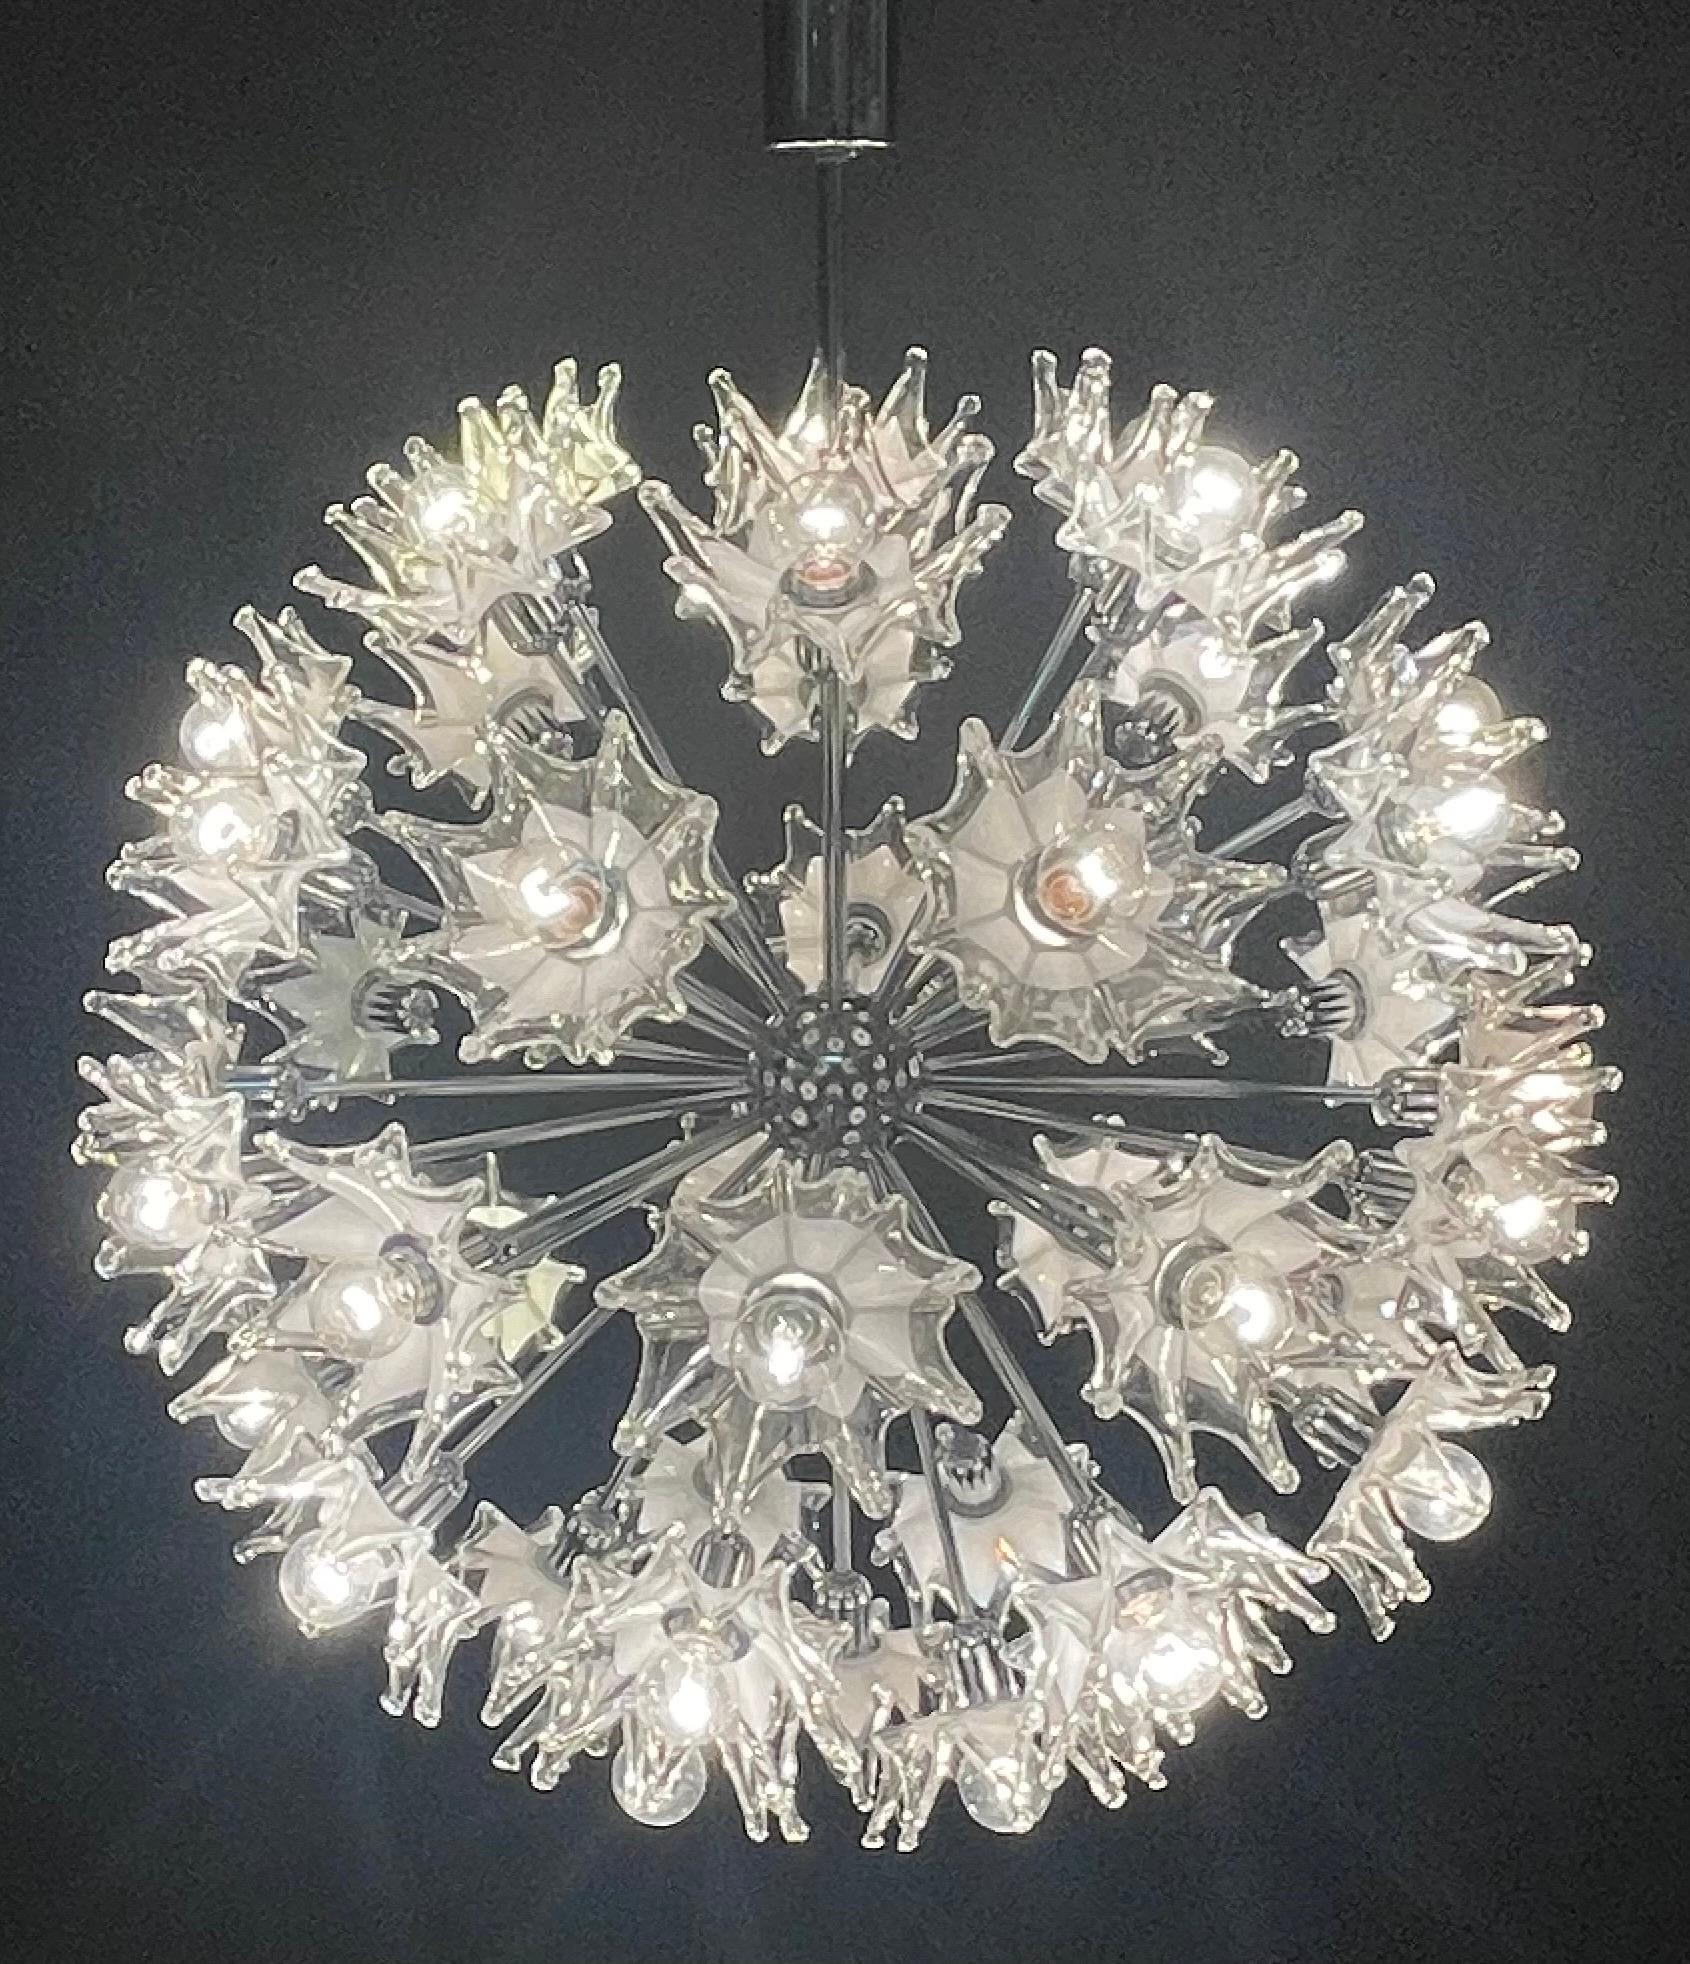 Mid-Century Modern Large 43, Light Murano Spiked Glass Ball Sputnik Chandelier by Mazzega, 1960s For Sale